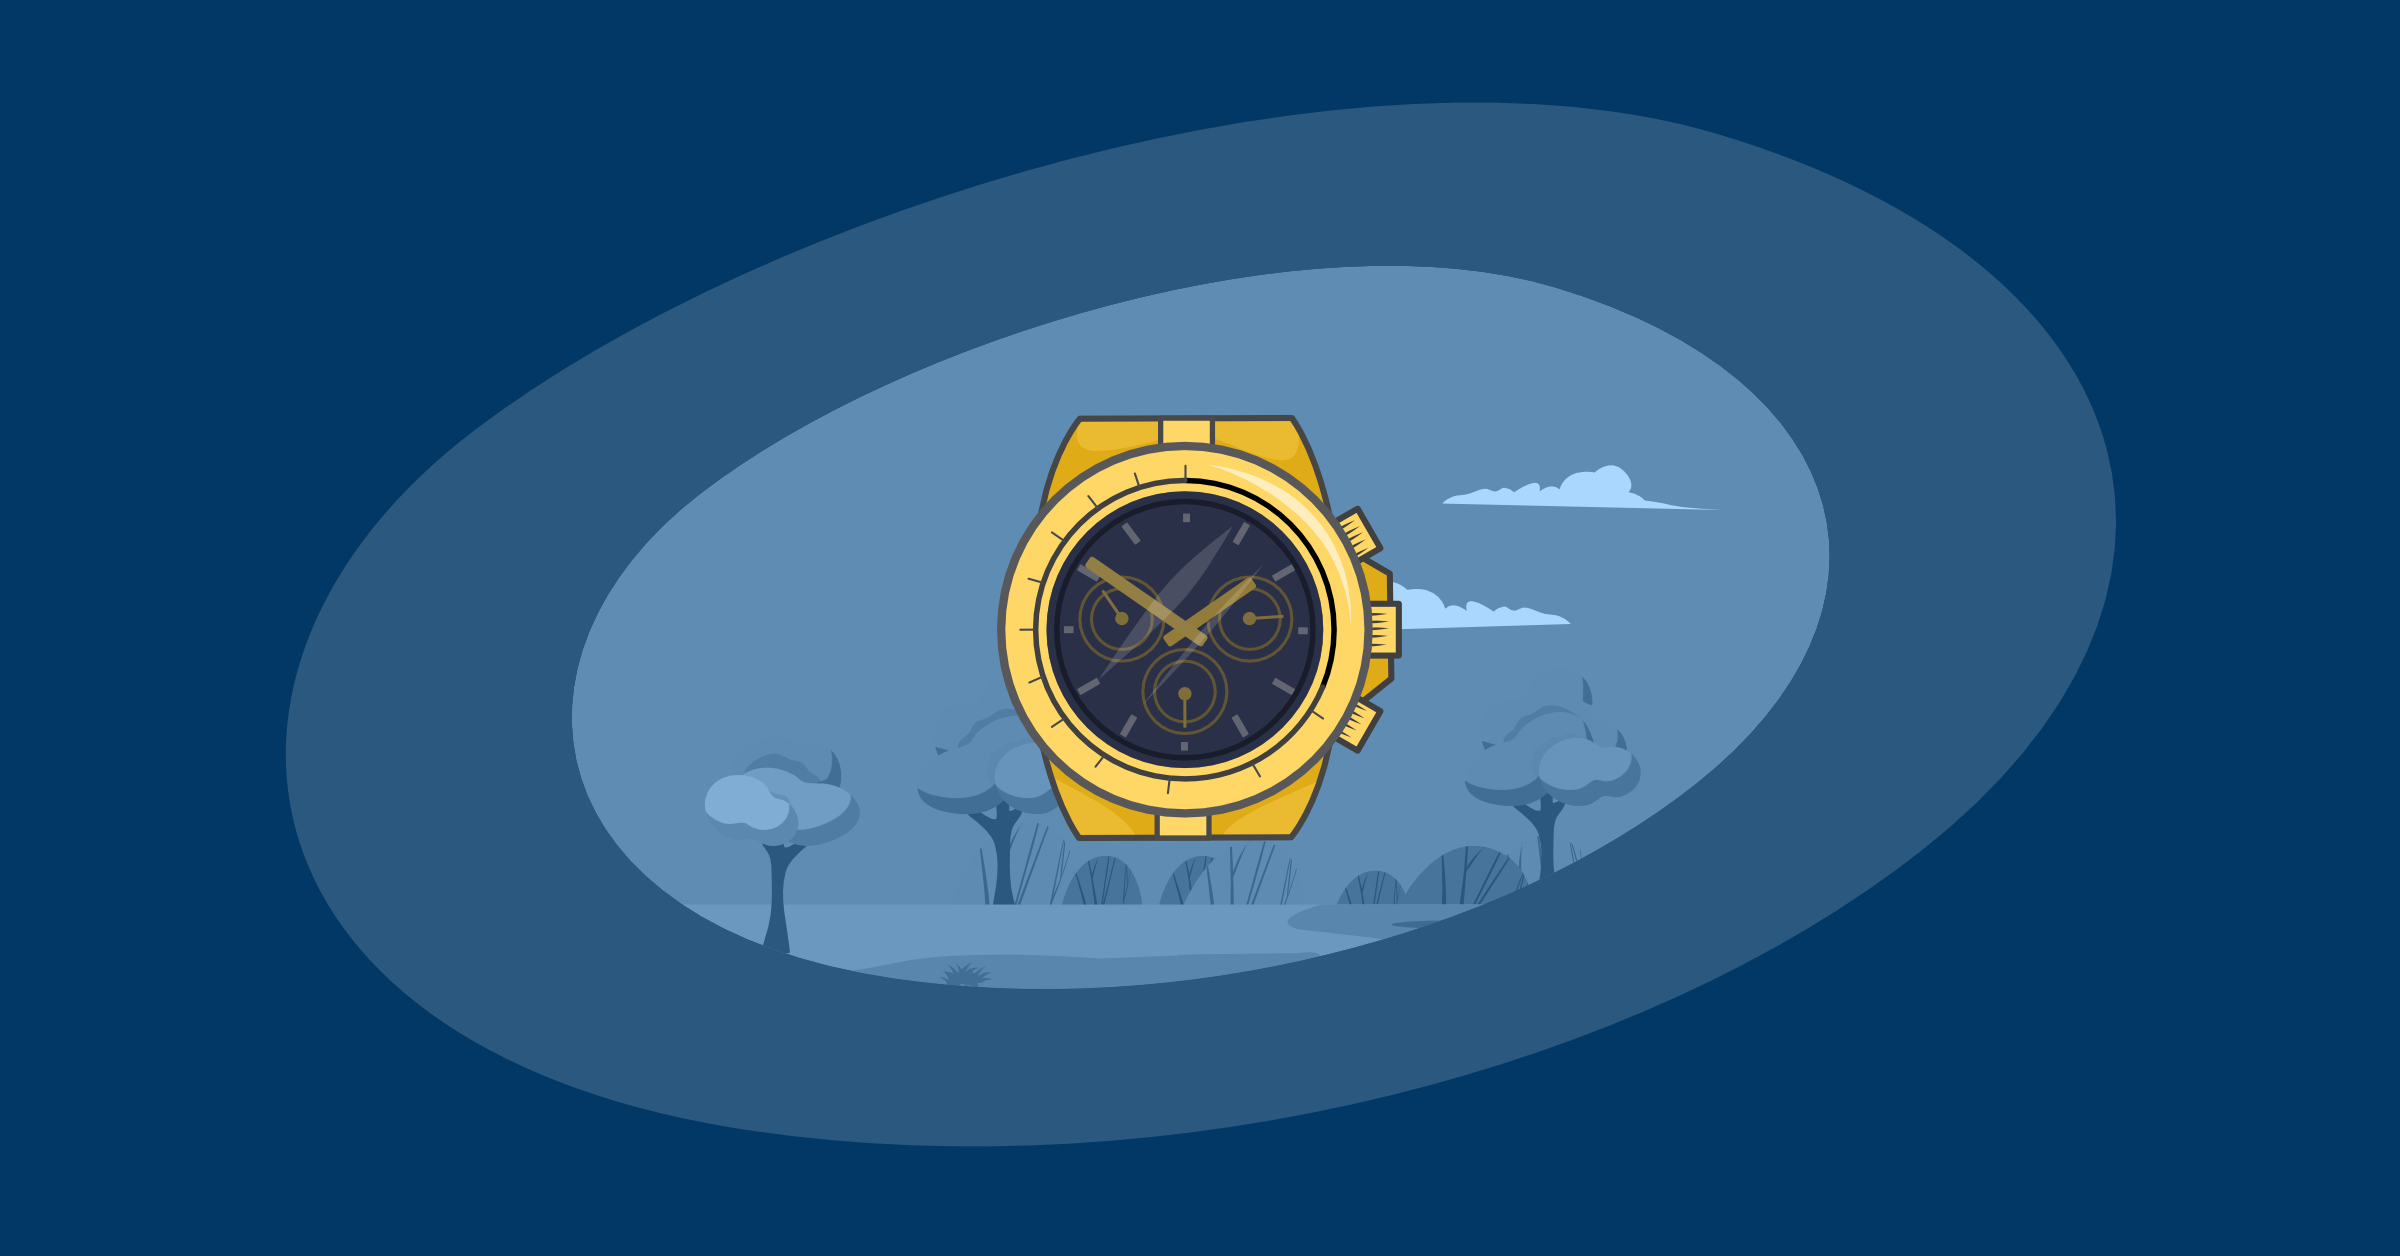 Illustration of a luxury watch